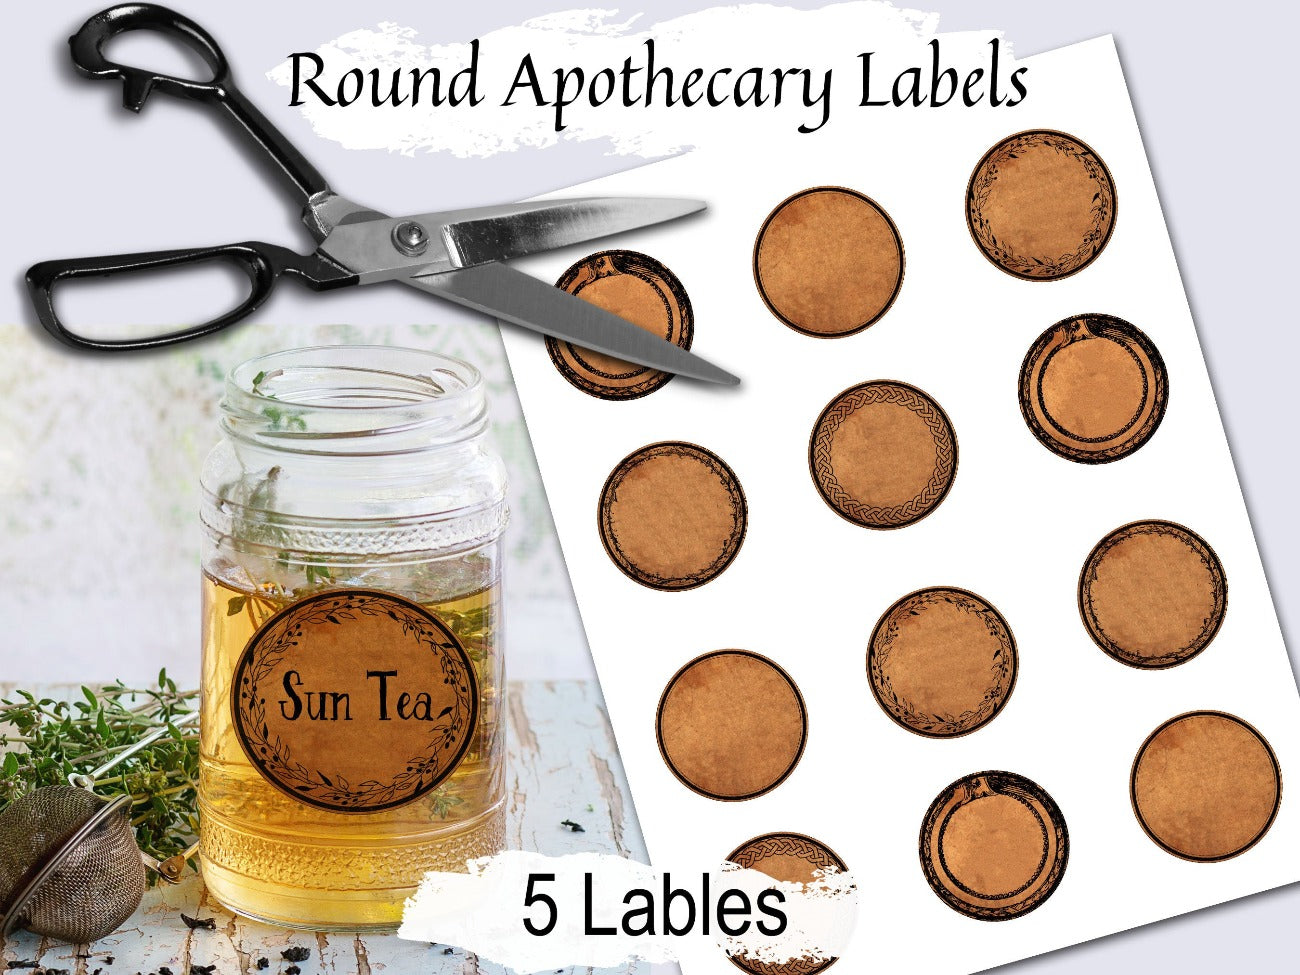 ROUND APOTHECARY LABELS, 5 Labels 2 sizes, Printable Potion Labels for Spells and Herbs, Aromatherapy Bottle Tags